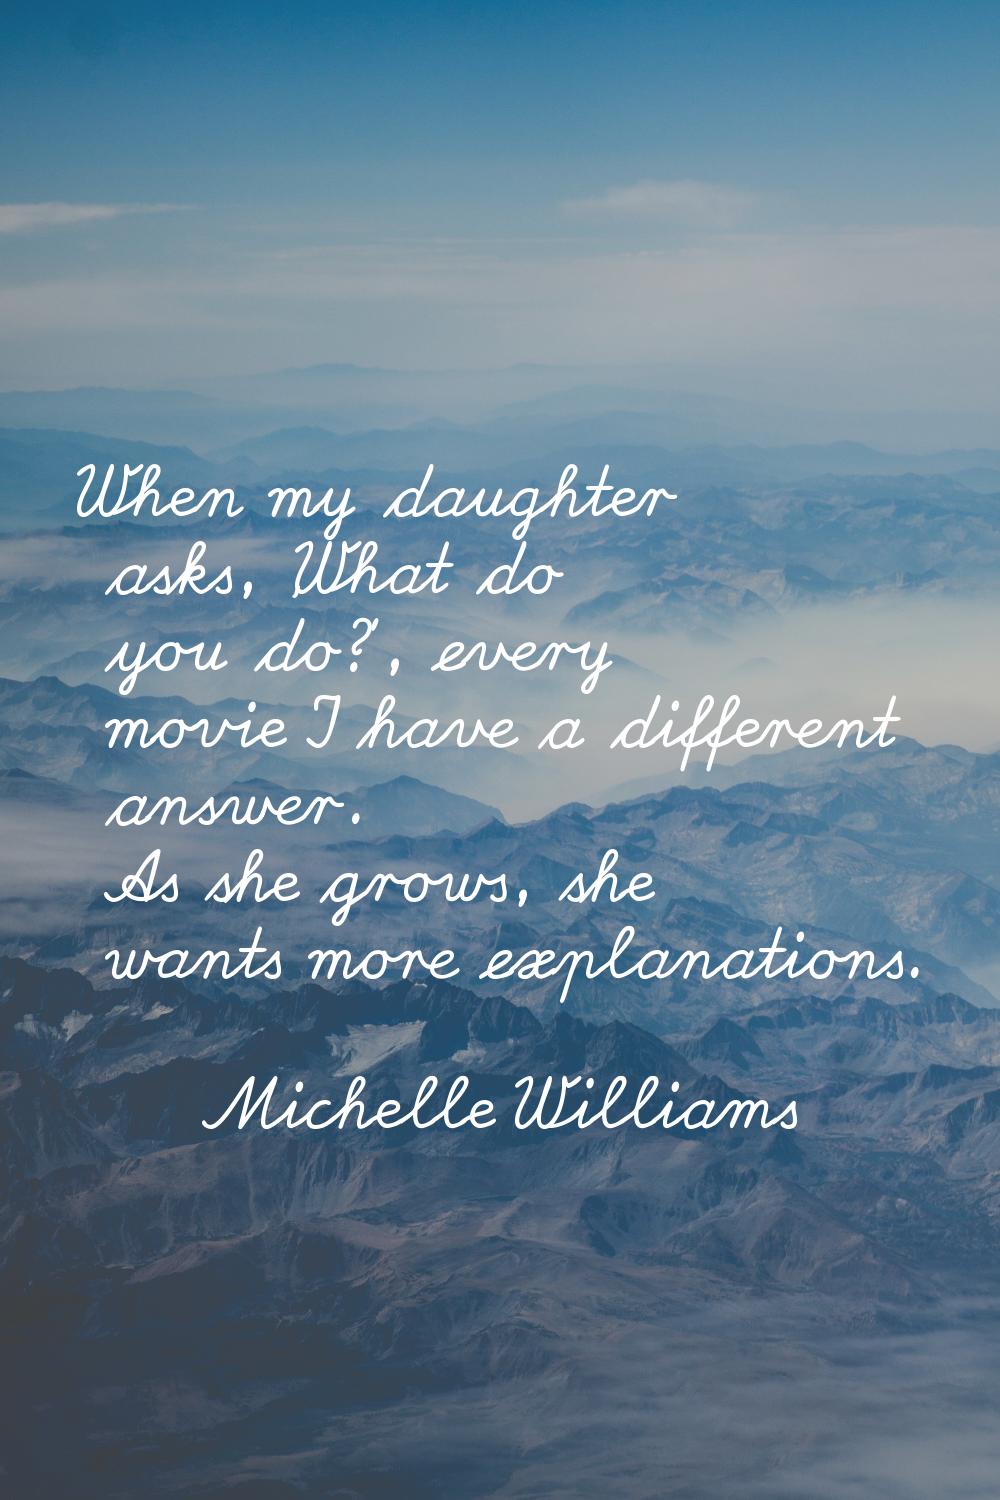 When my daughter asks, 'What do you do?', every movie I have a different answer. As she grows, she 